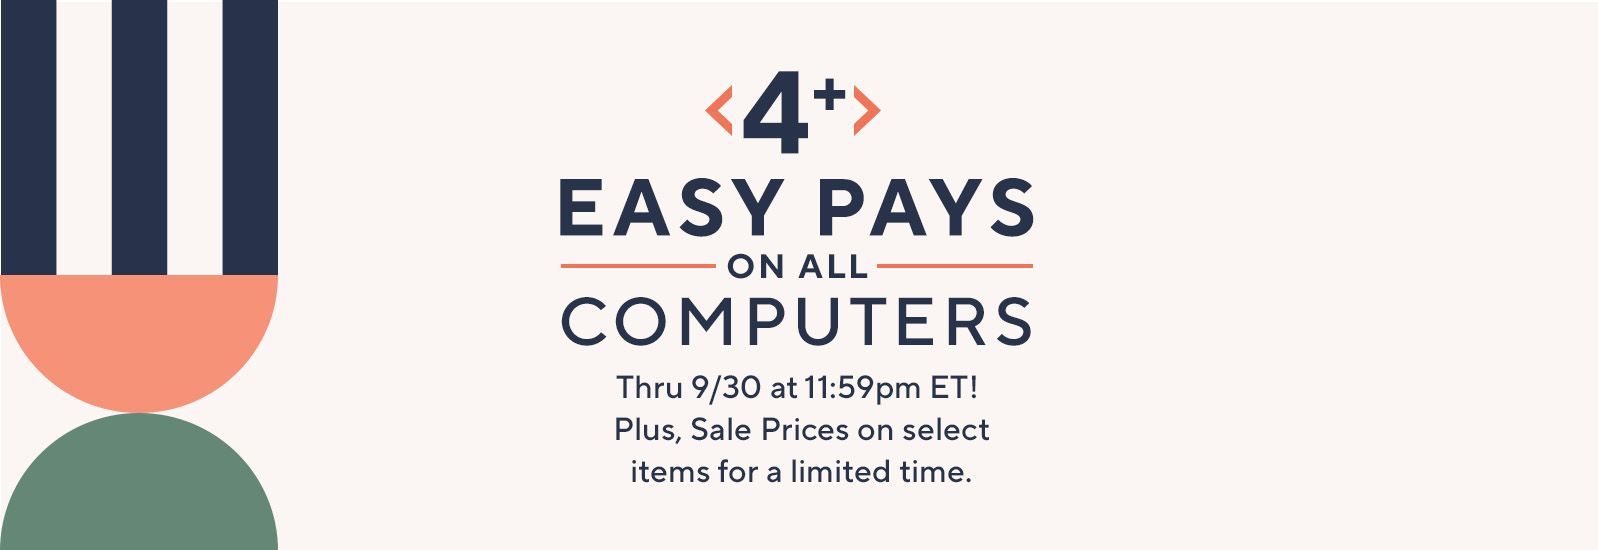 4+ Easy Pays on All Computers Thru 9/30 at 11:59pm ET! Plus, Sale Prices on select items for a limited time.